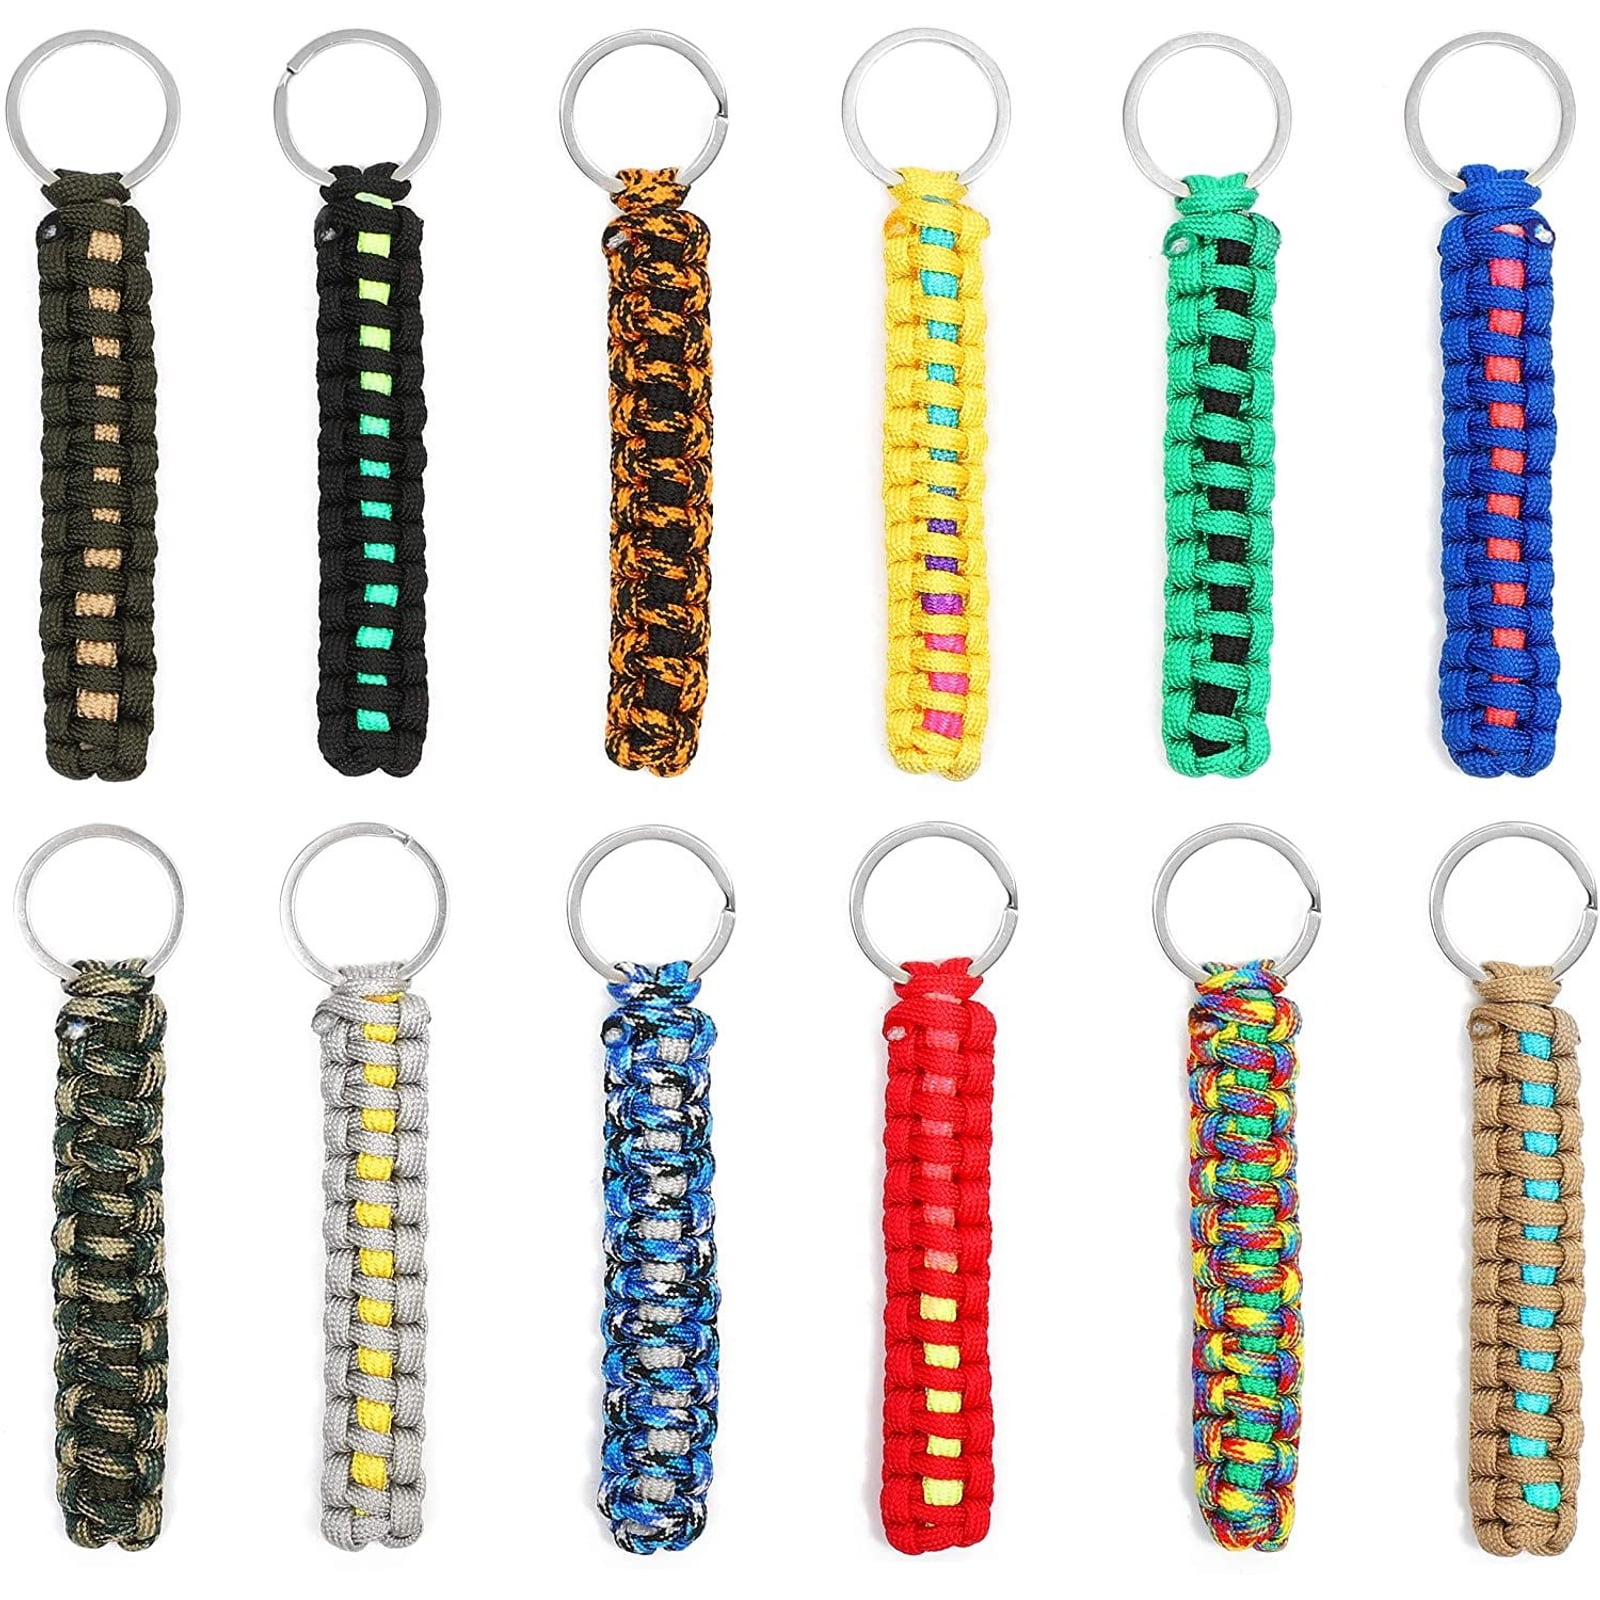 12-Pack Paracord Keychain with Metal Ring, Colorful Braided Lanyard for Car  Keys & Backpacks - Walmart.com